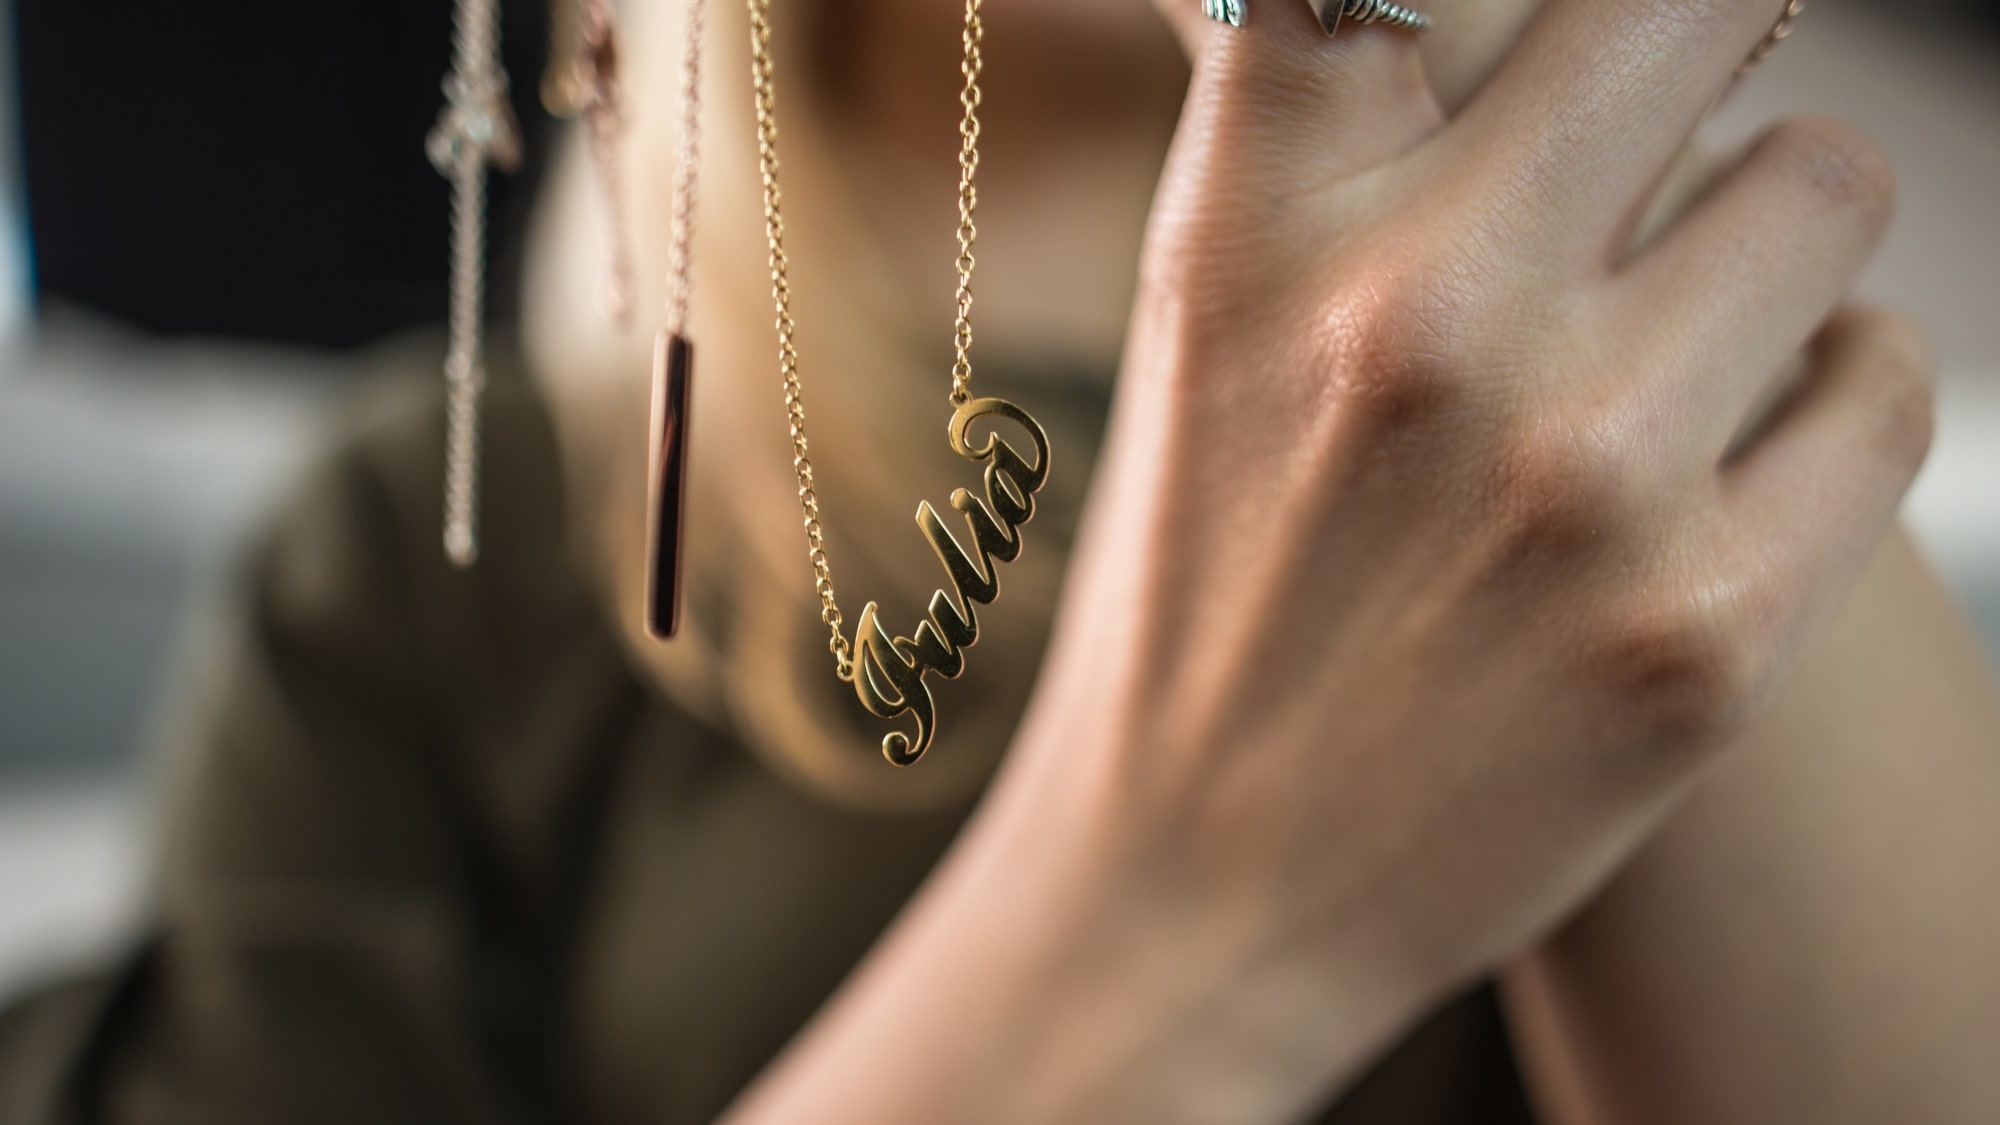 Beautiful Personalized Necklaces Under $100